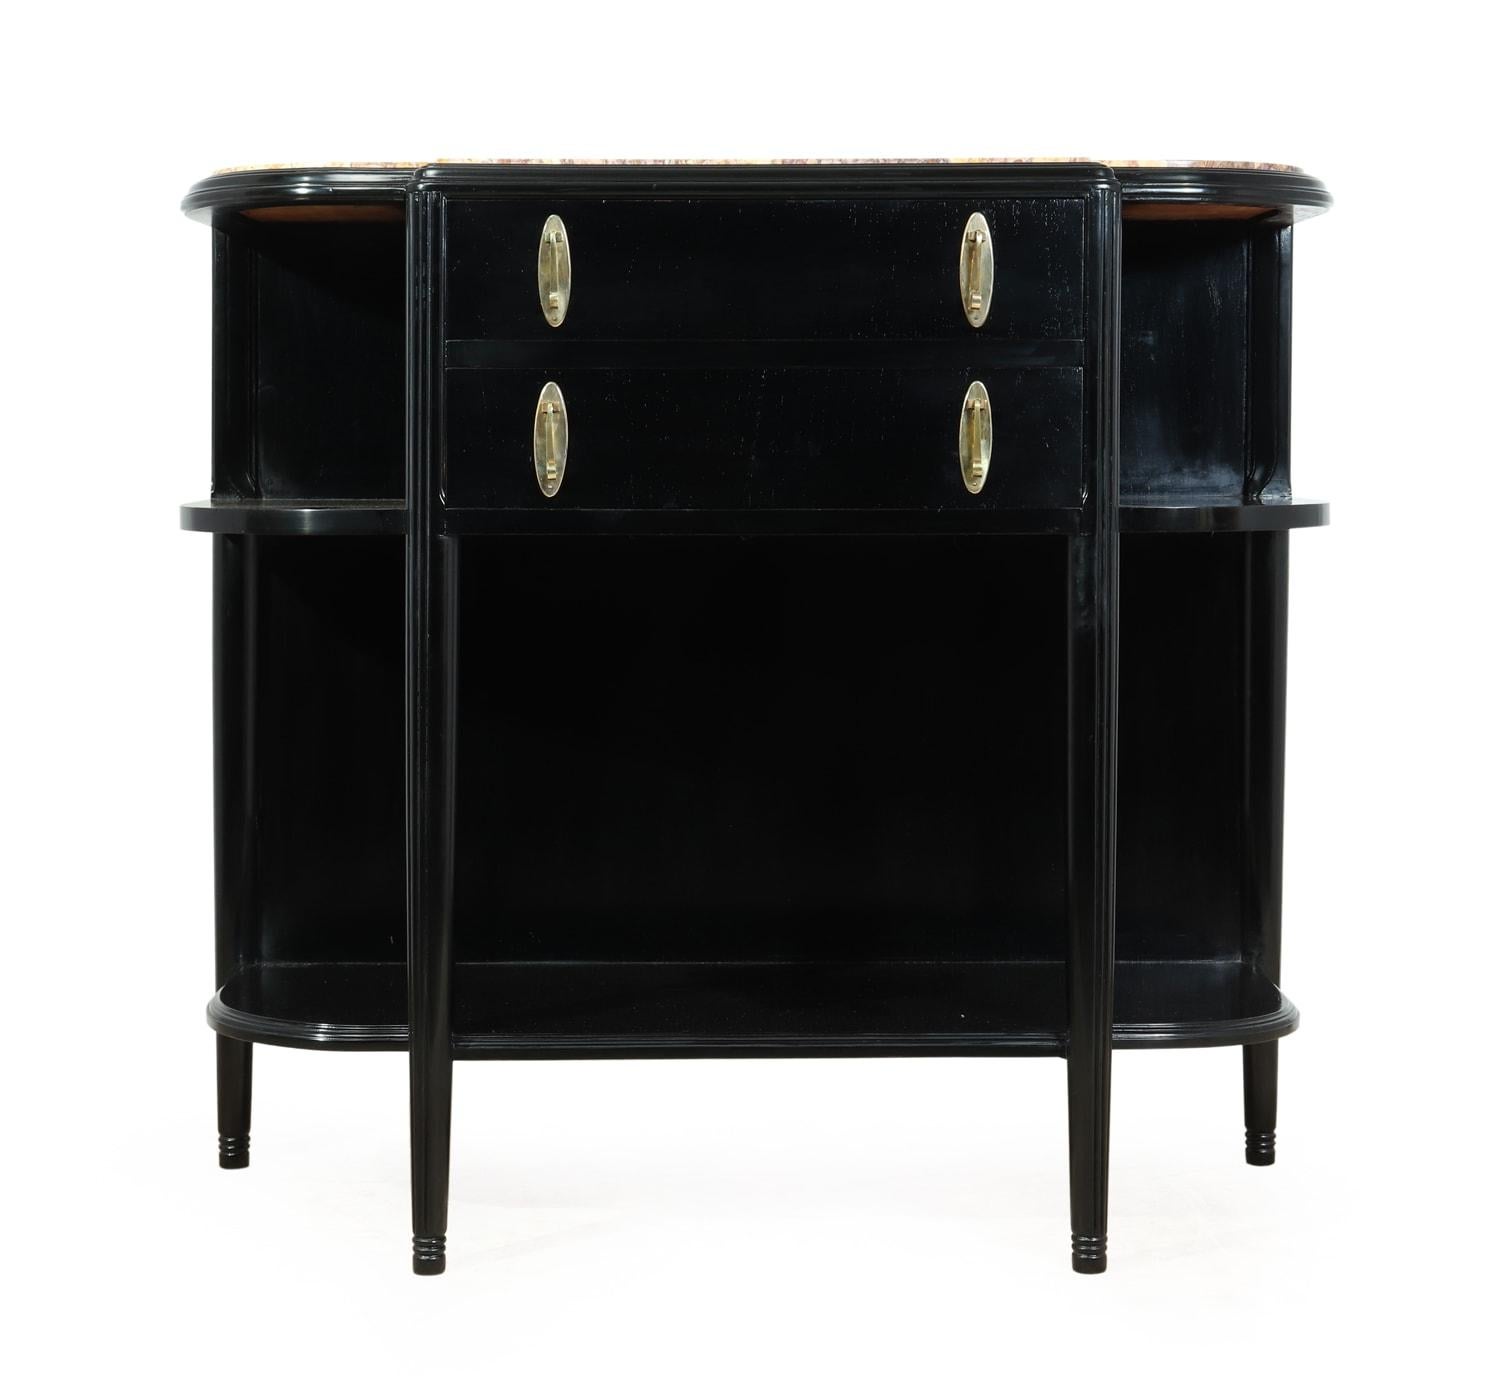 Art Deco console table with marble top

This Art Deco console or hall table has two drawers with polished bronze handles, reeded legs and a marble top, the console table has been re polished to a black piano finish, the marble on top has had no